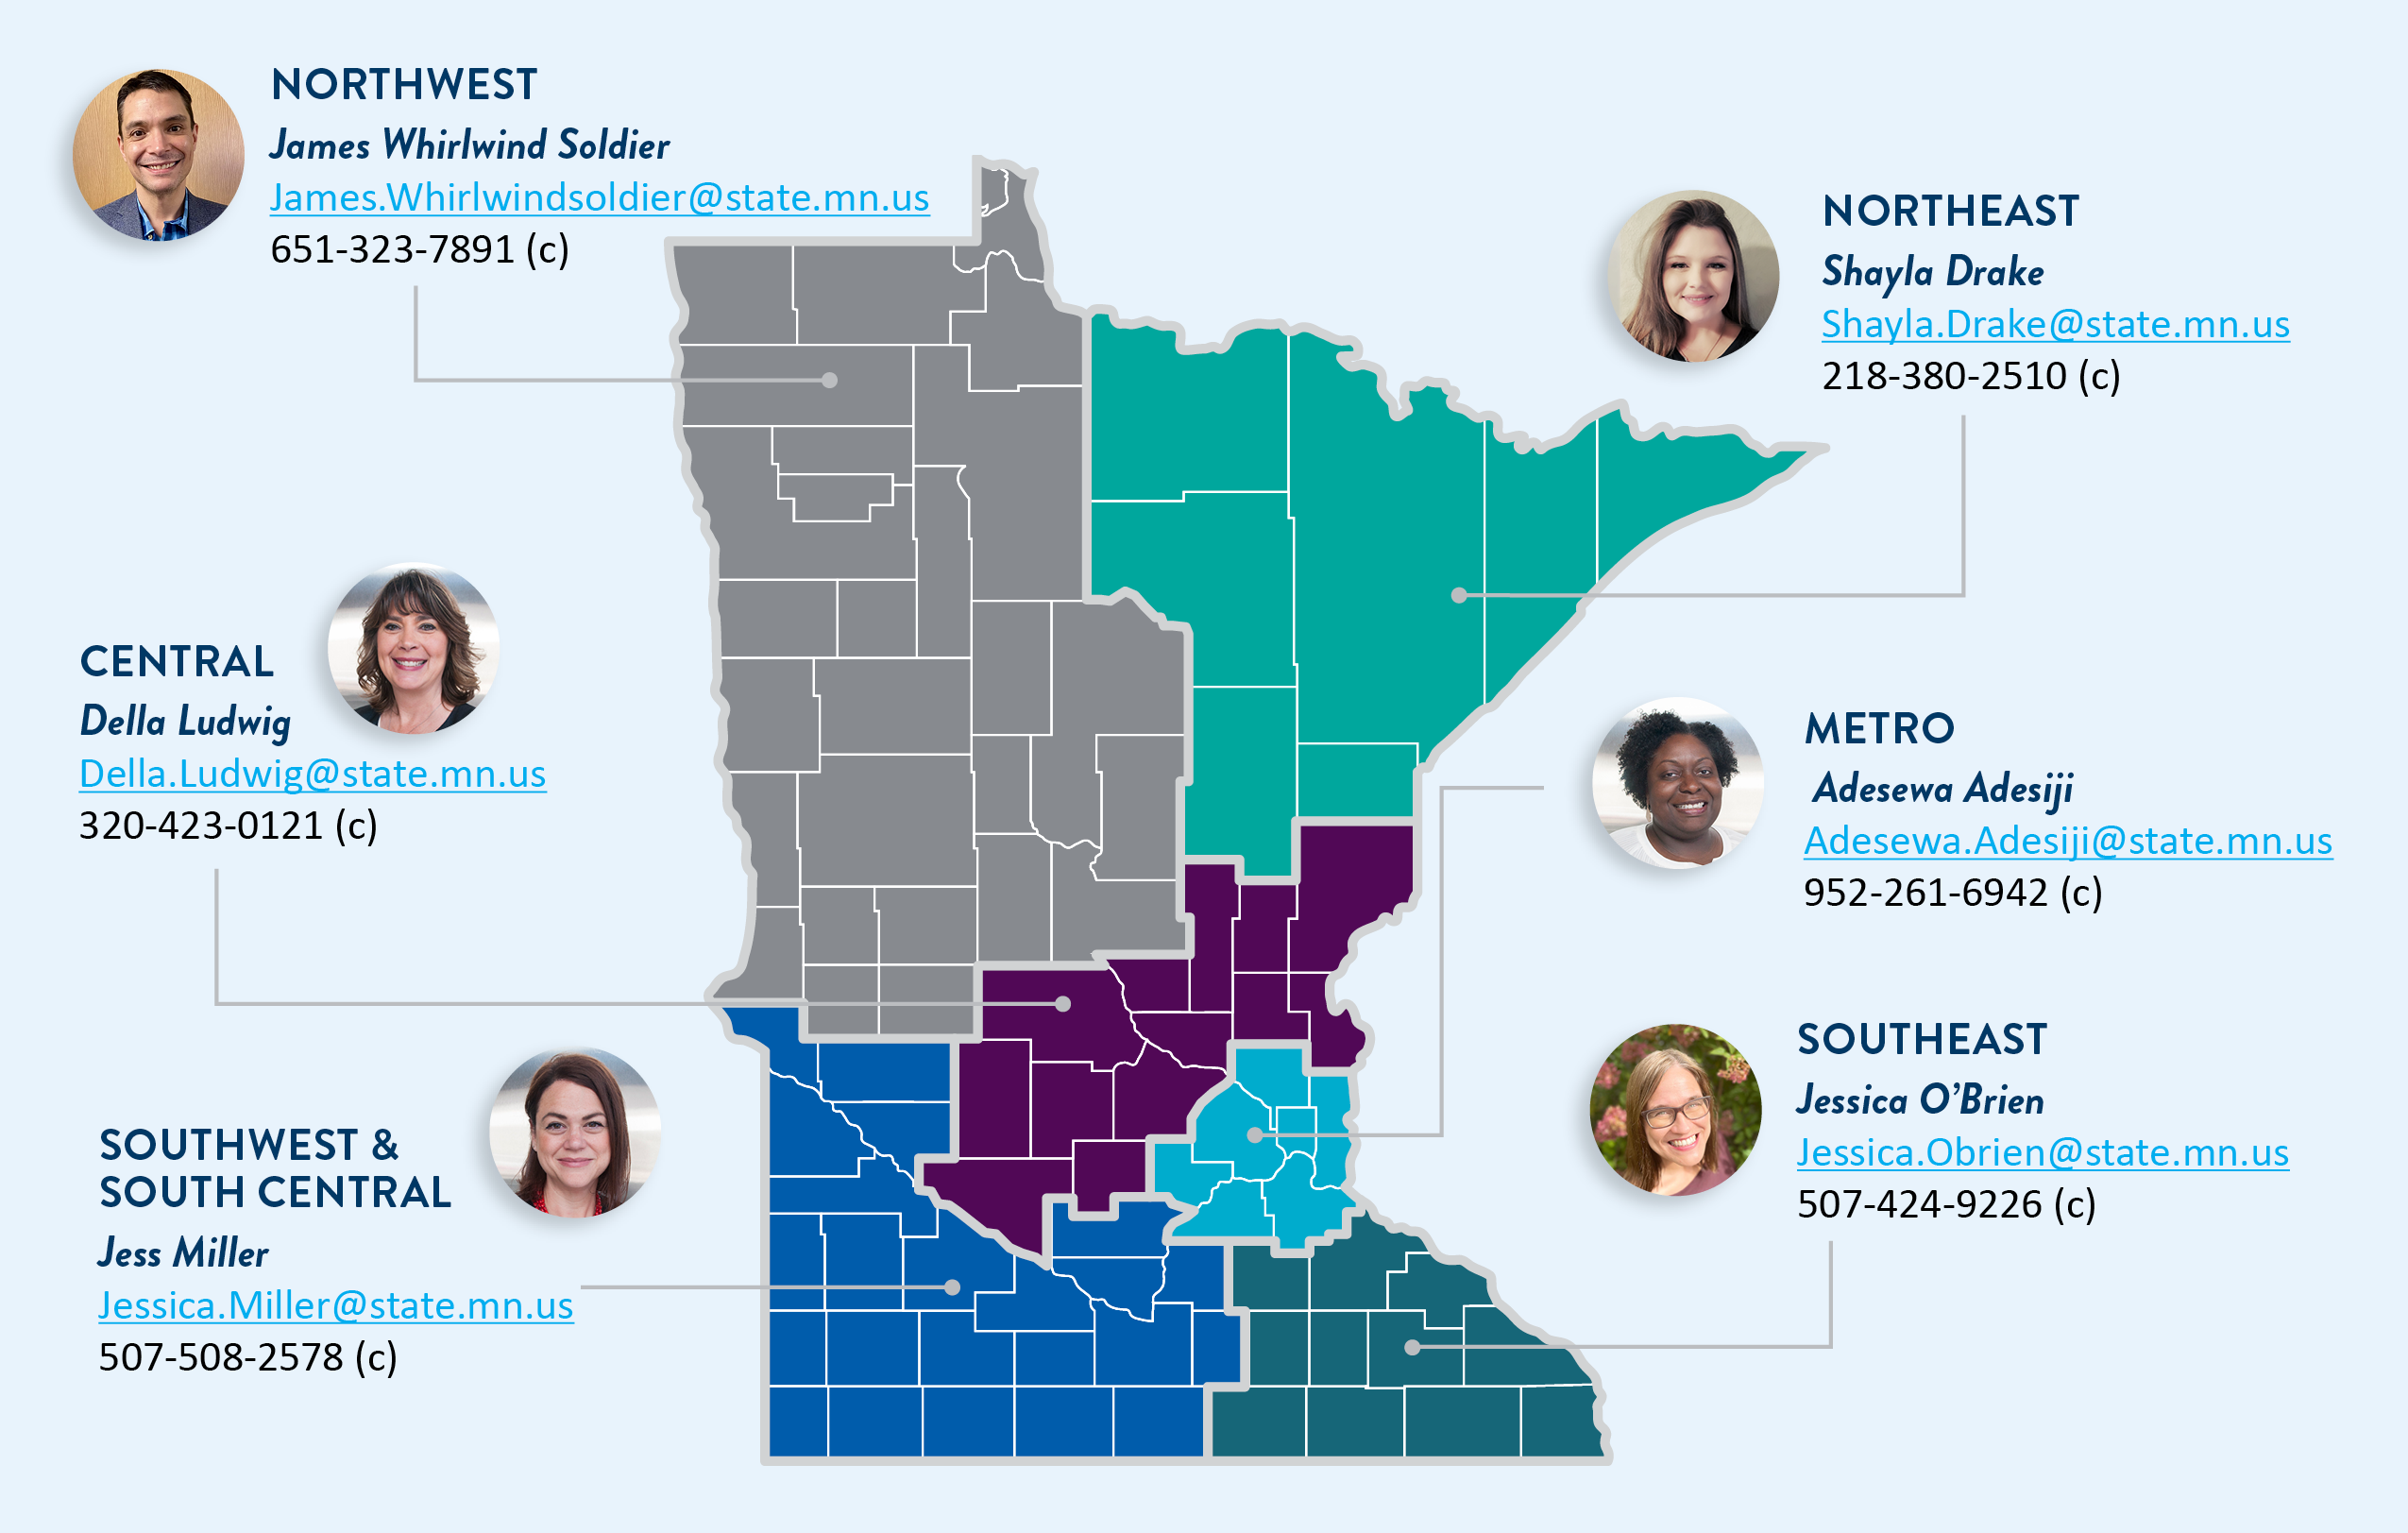 A map of Minnesota highlighting the 6 different Workforce Strategy Consultants. Jess Miller is the representative for Southwest & South Central Minnesota. Her email is listed as jessica.miller@state.mn.us. Her cell phone is listed as 507-508-2578.